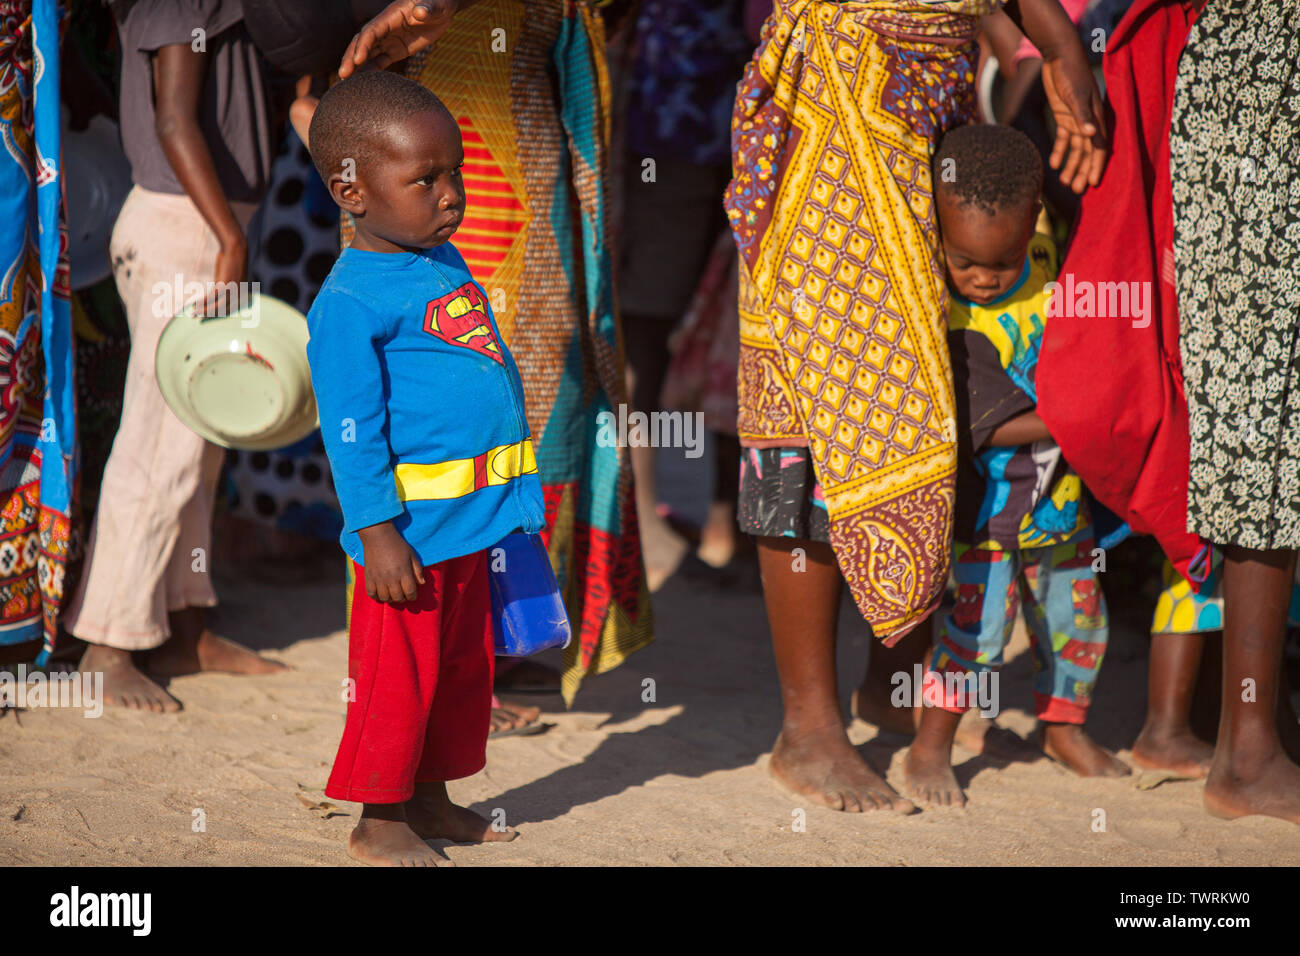 A hungry child wearing a Superman suit waits in line to get food on a hot day with other children in the background Stock Photo